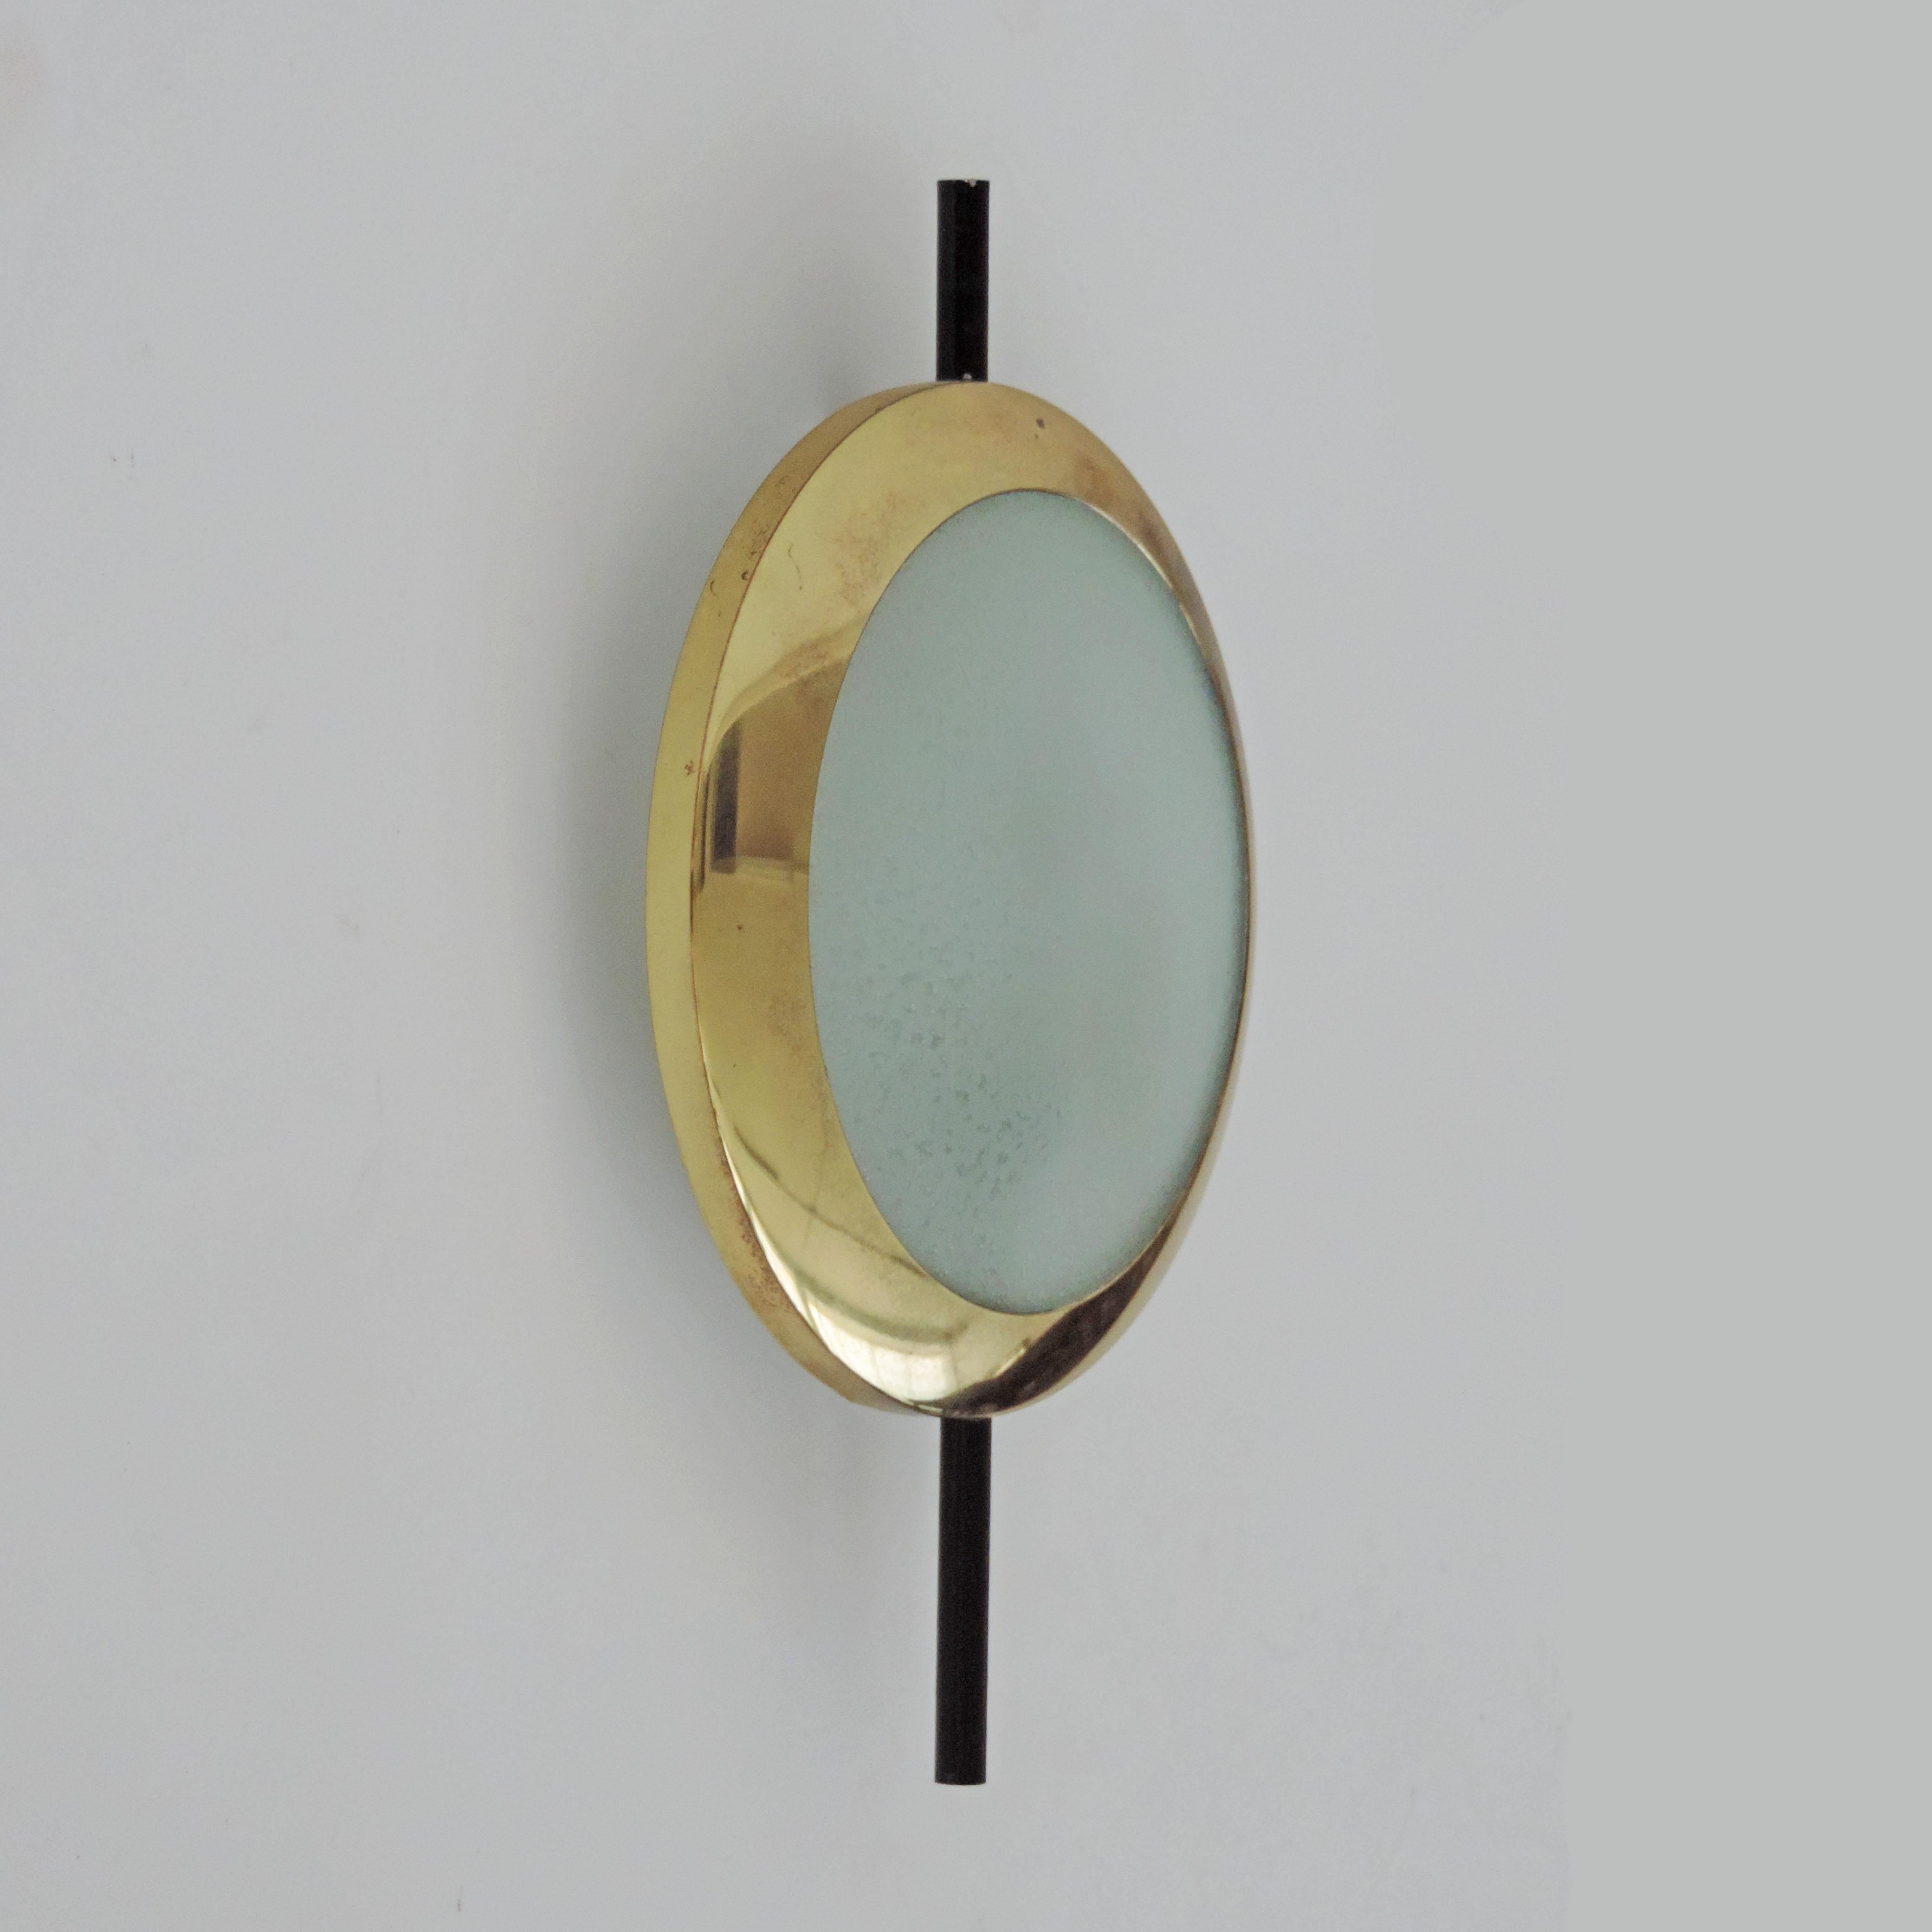 Pressed Large Abstract Stilnovo Wall Lamp in Brass and Glass, Italy 1950s For Sale